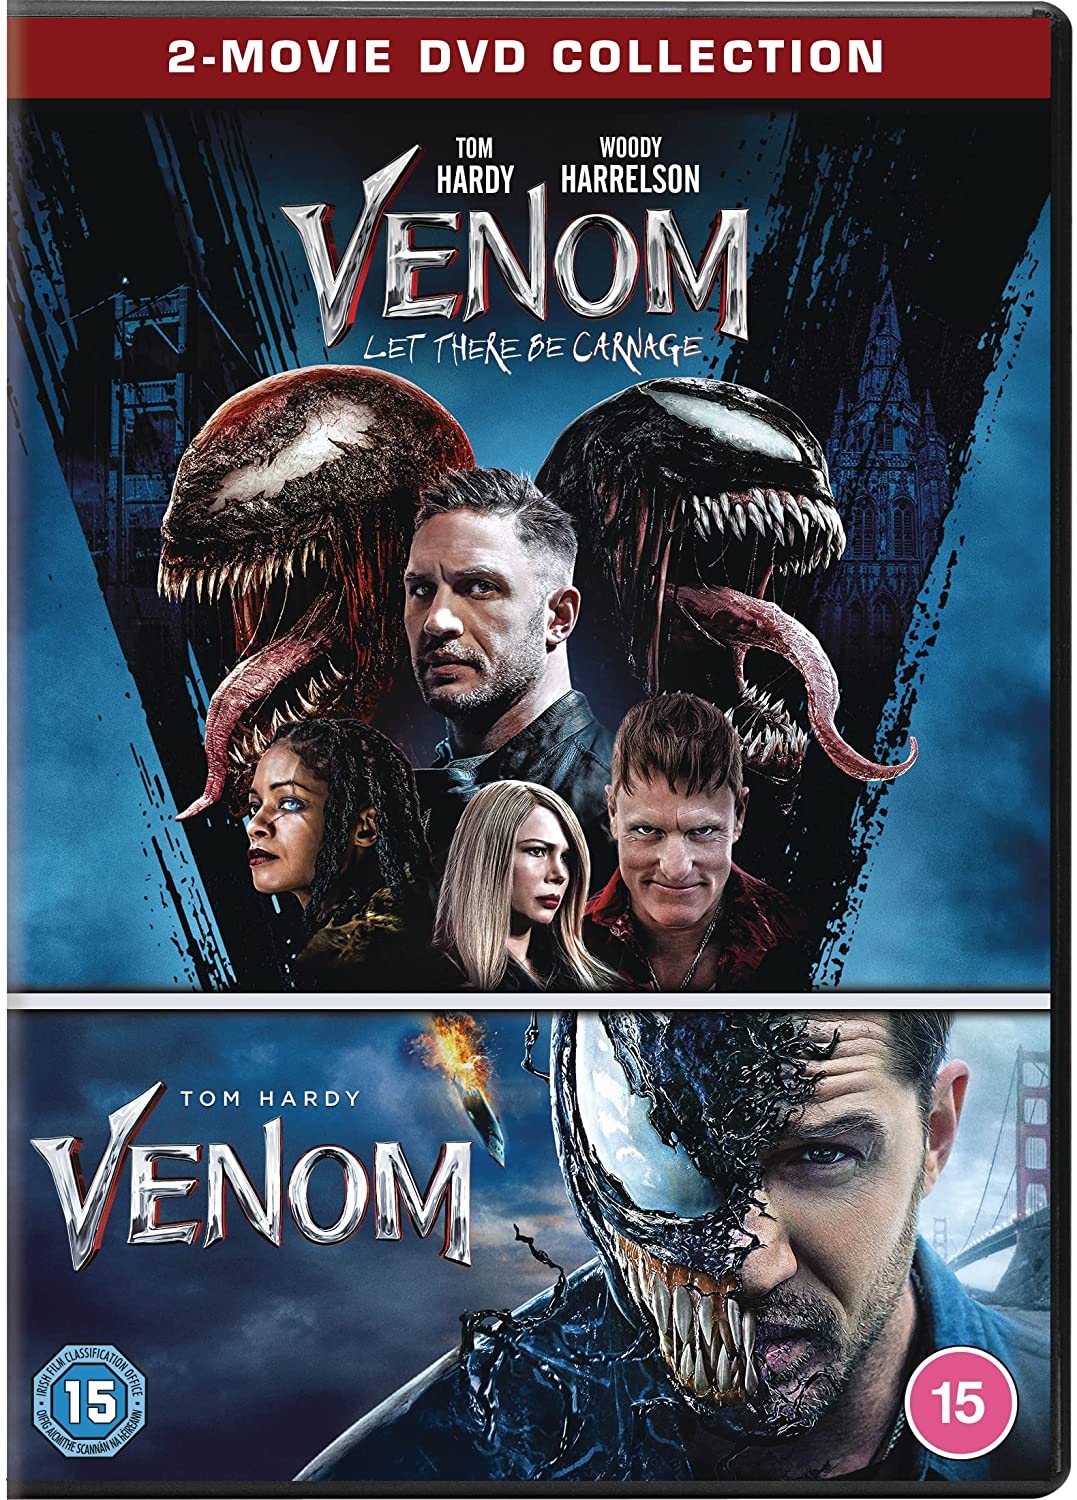 Venom 1&2: (2018) & Let There Be Carnage  [2021] [DVD]